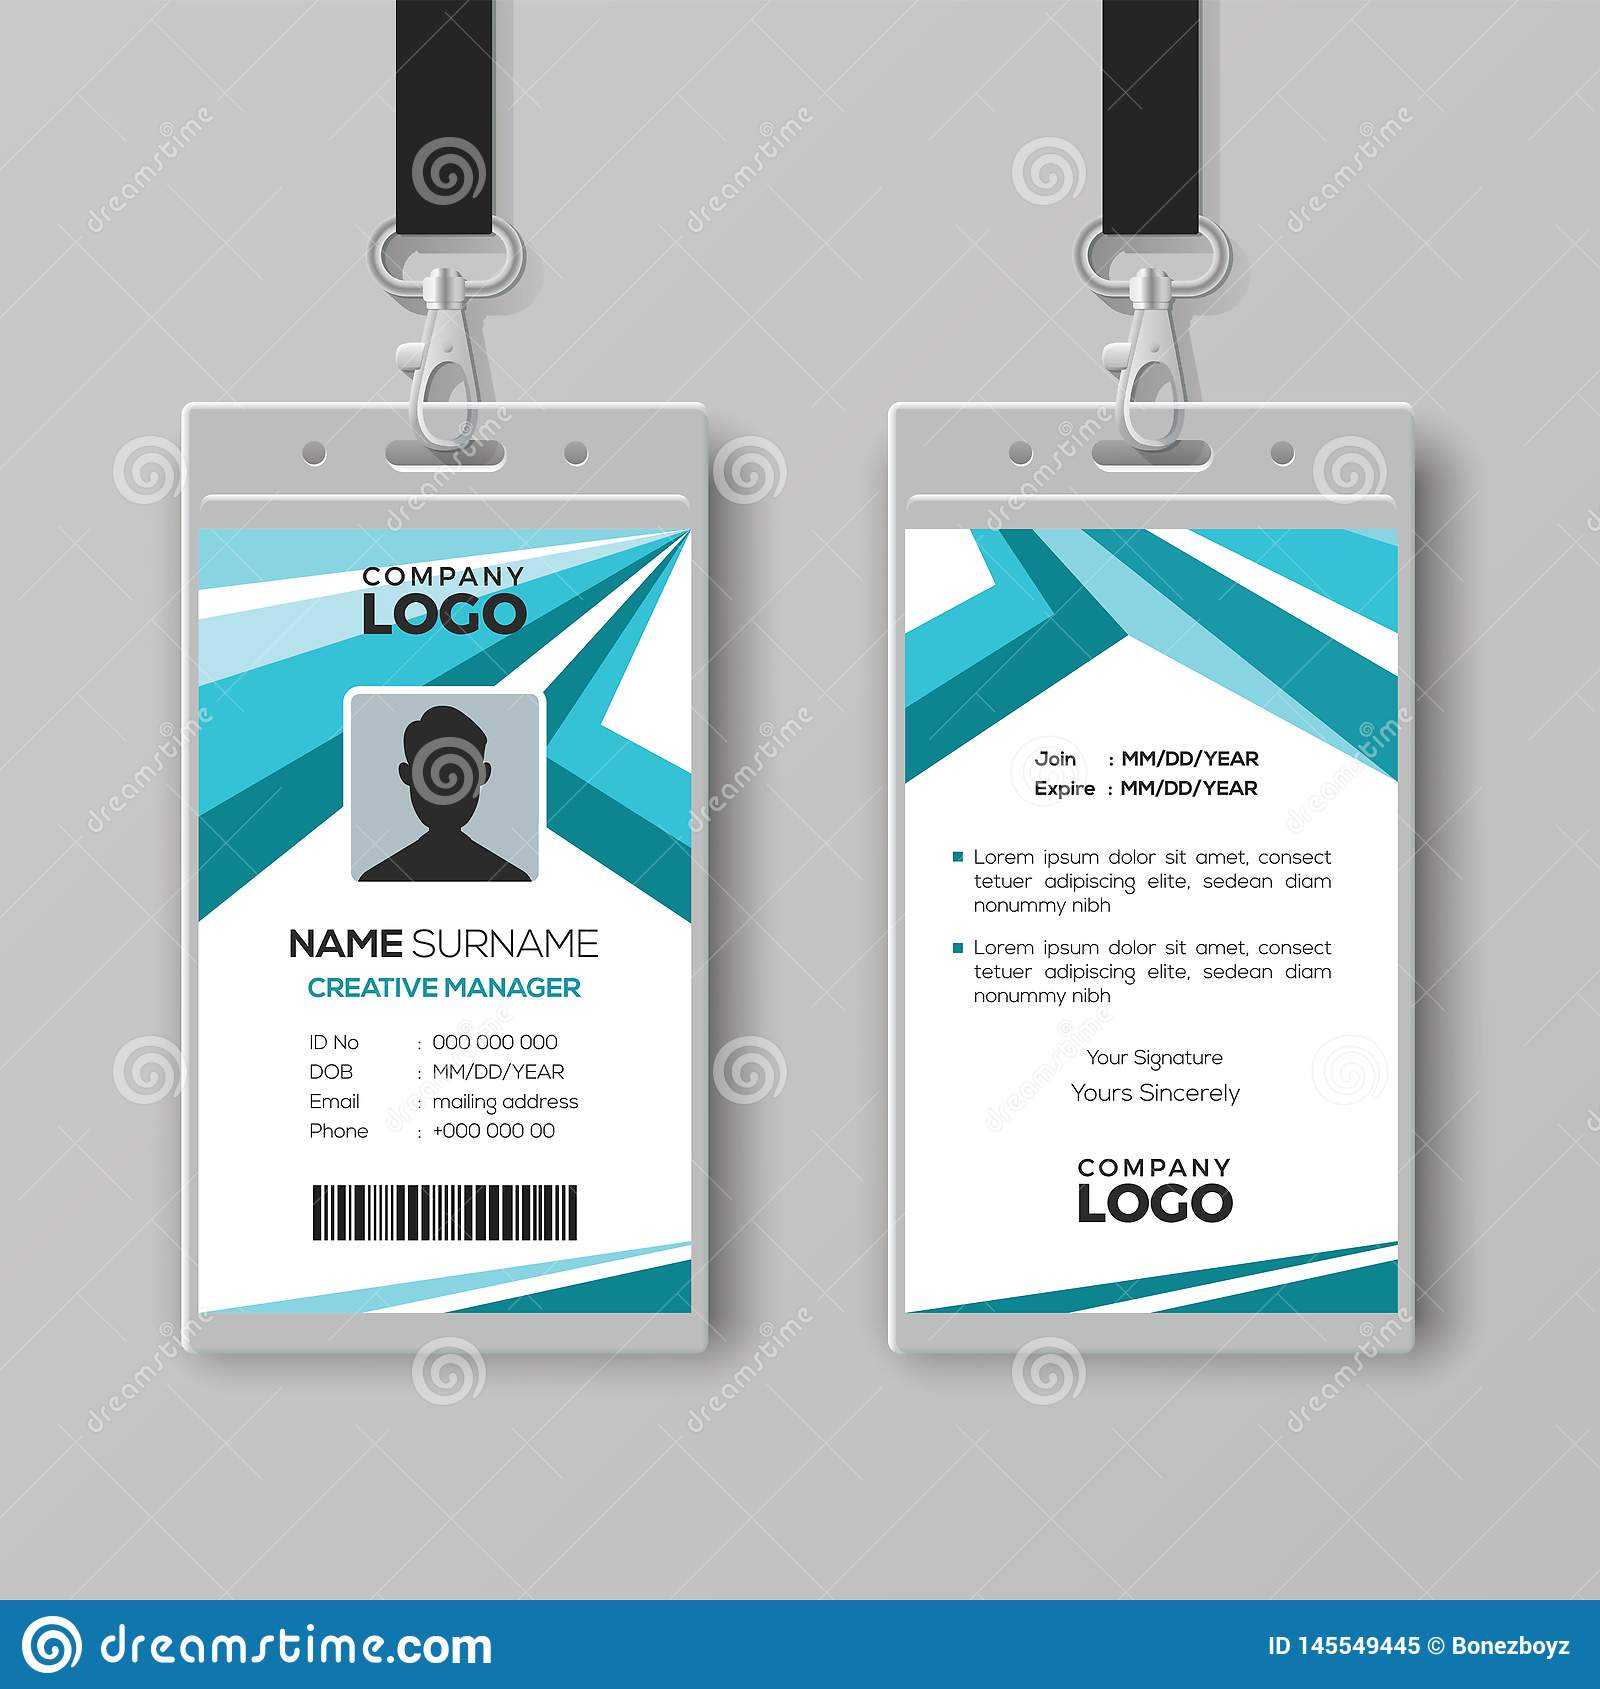 Abstract Corporate Id Card Design Template Stock Vector Throughout Conference Id Card Template